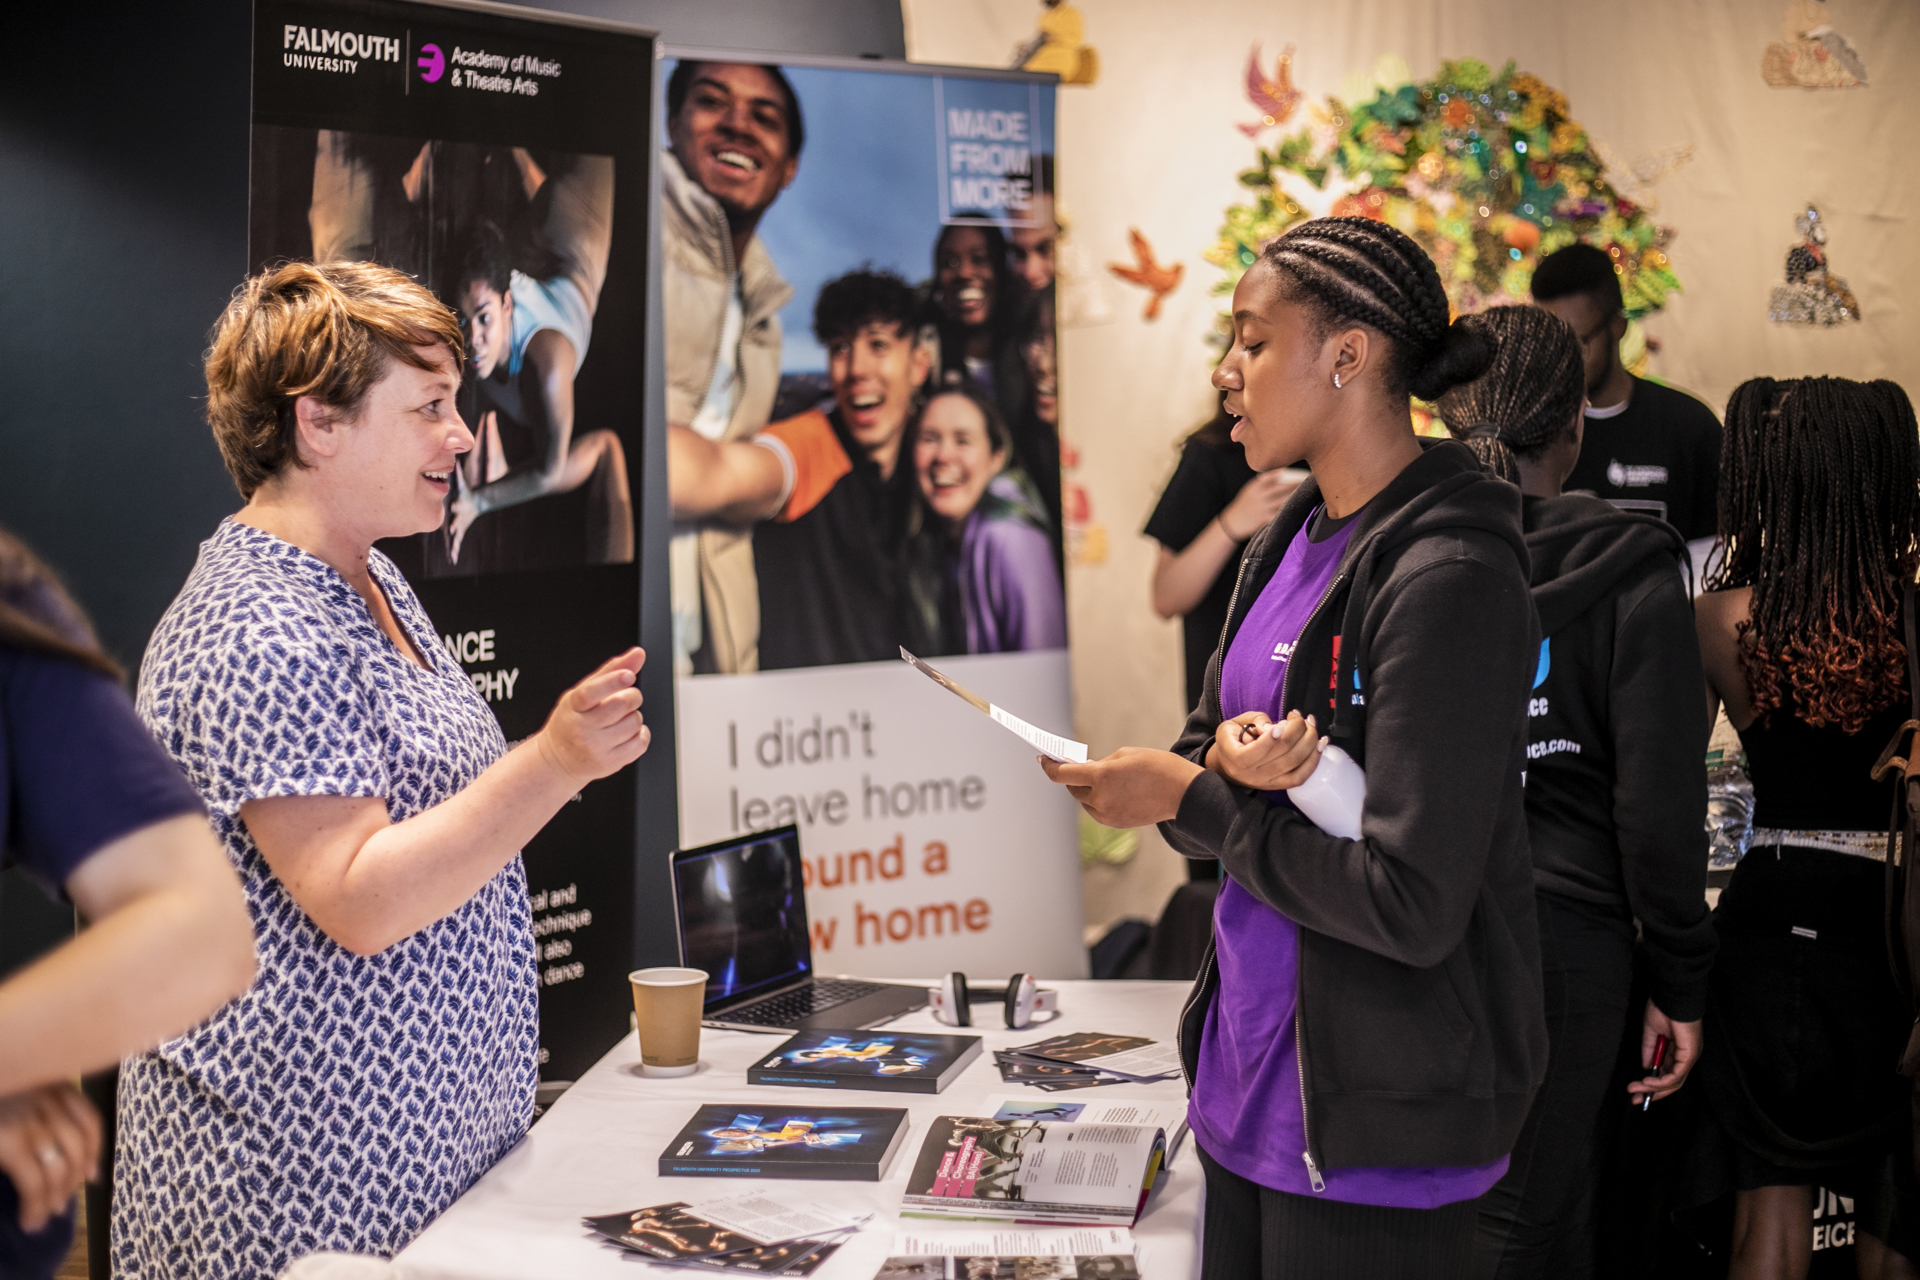 female standing at an exhibition stand talking to a young female who is holding a leaflet. Behind them are pull up banners 